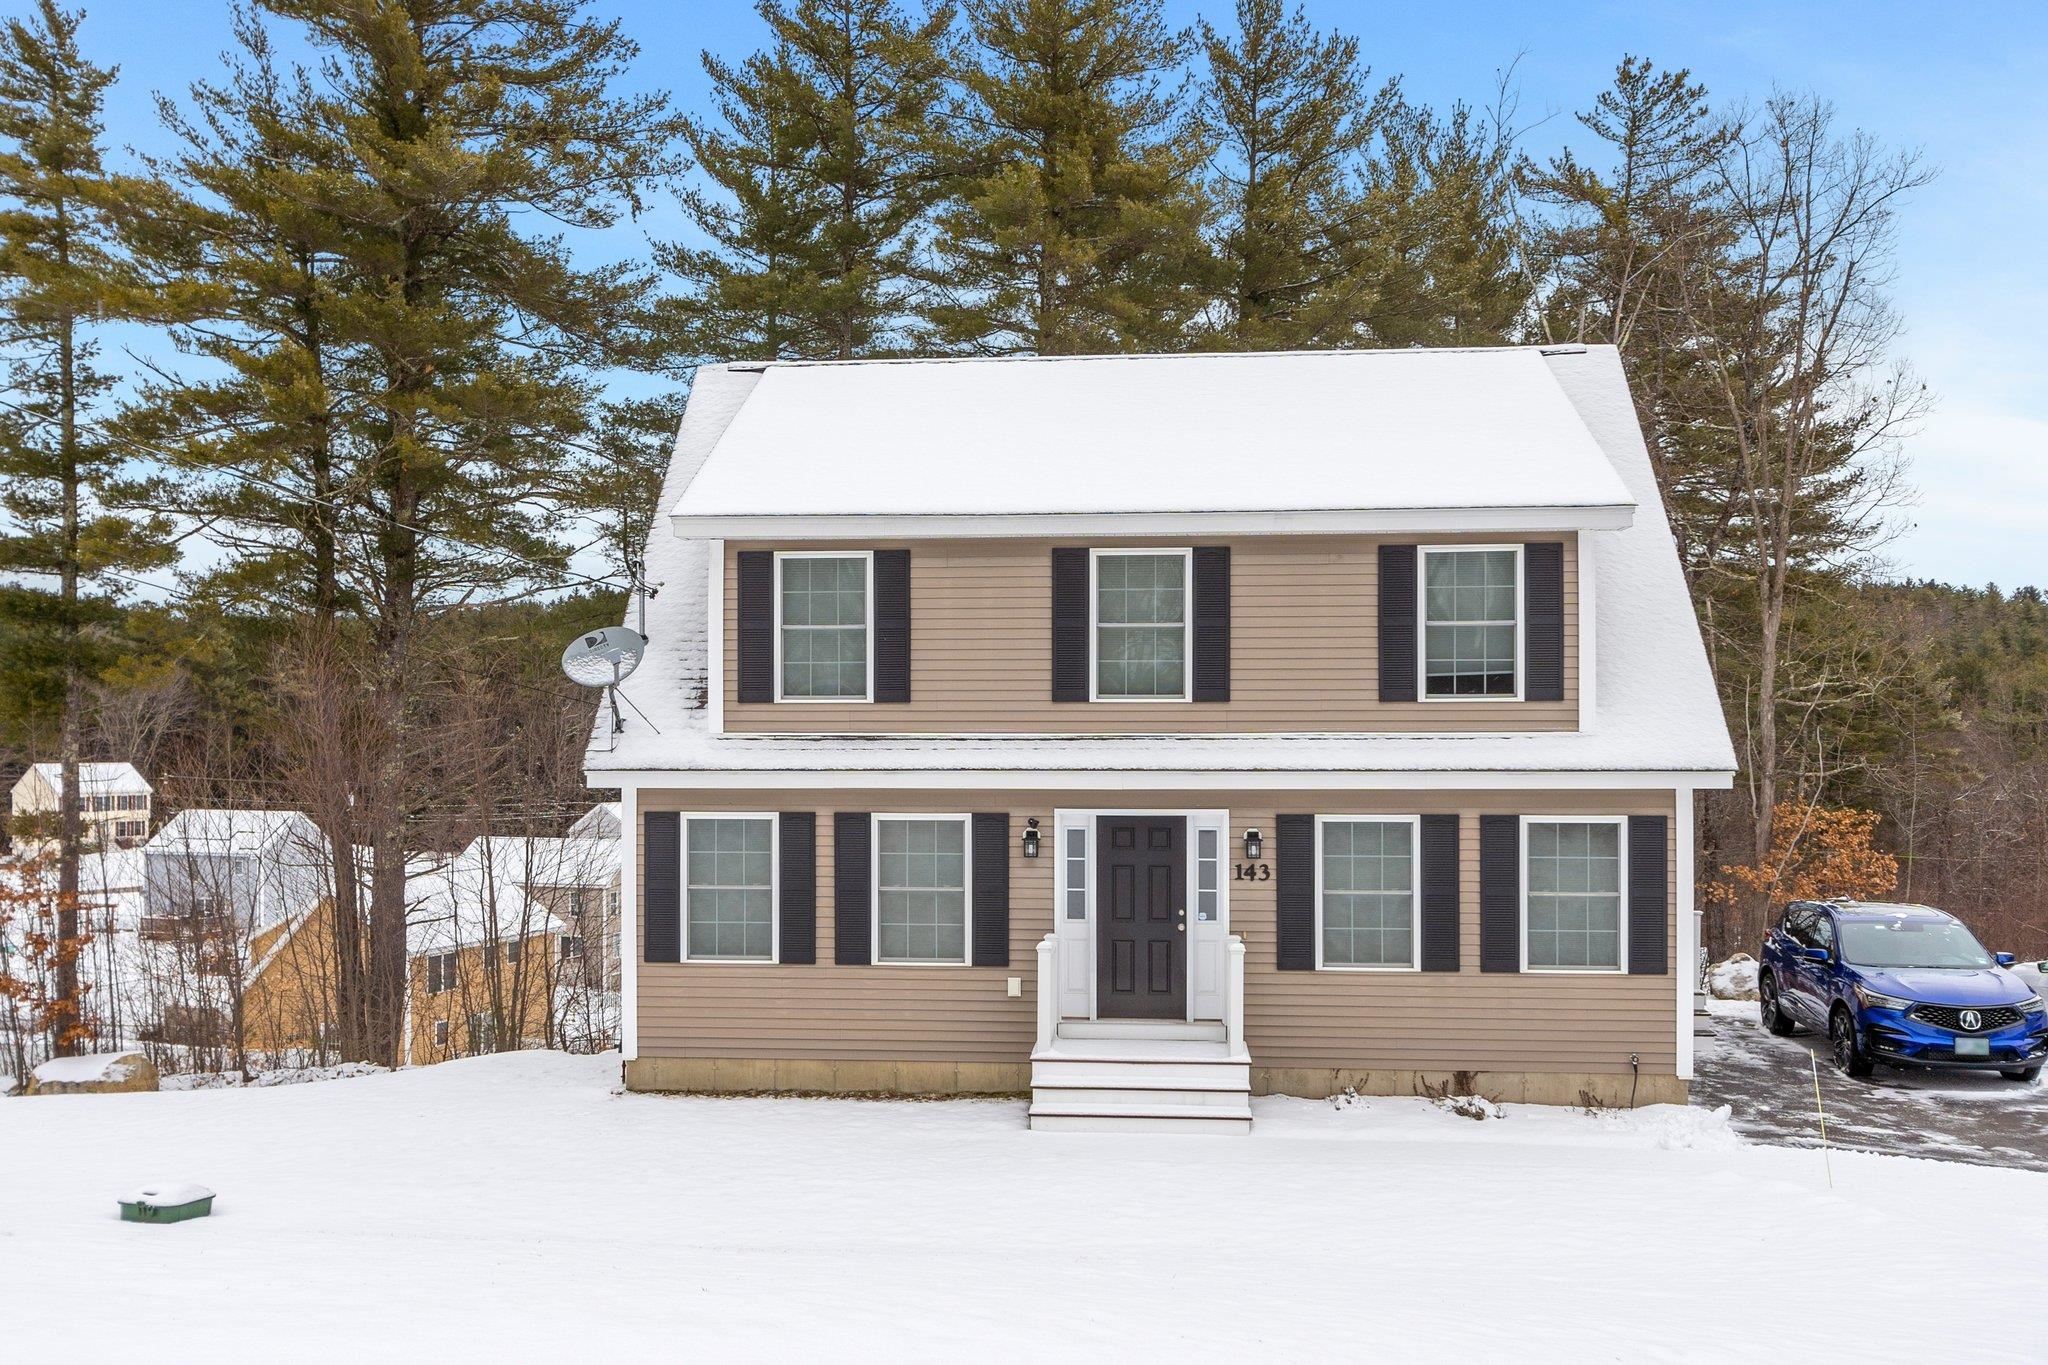 Photo of 143 Badger Hill Drive Milford NH 03055